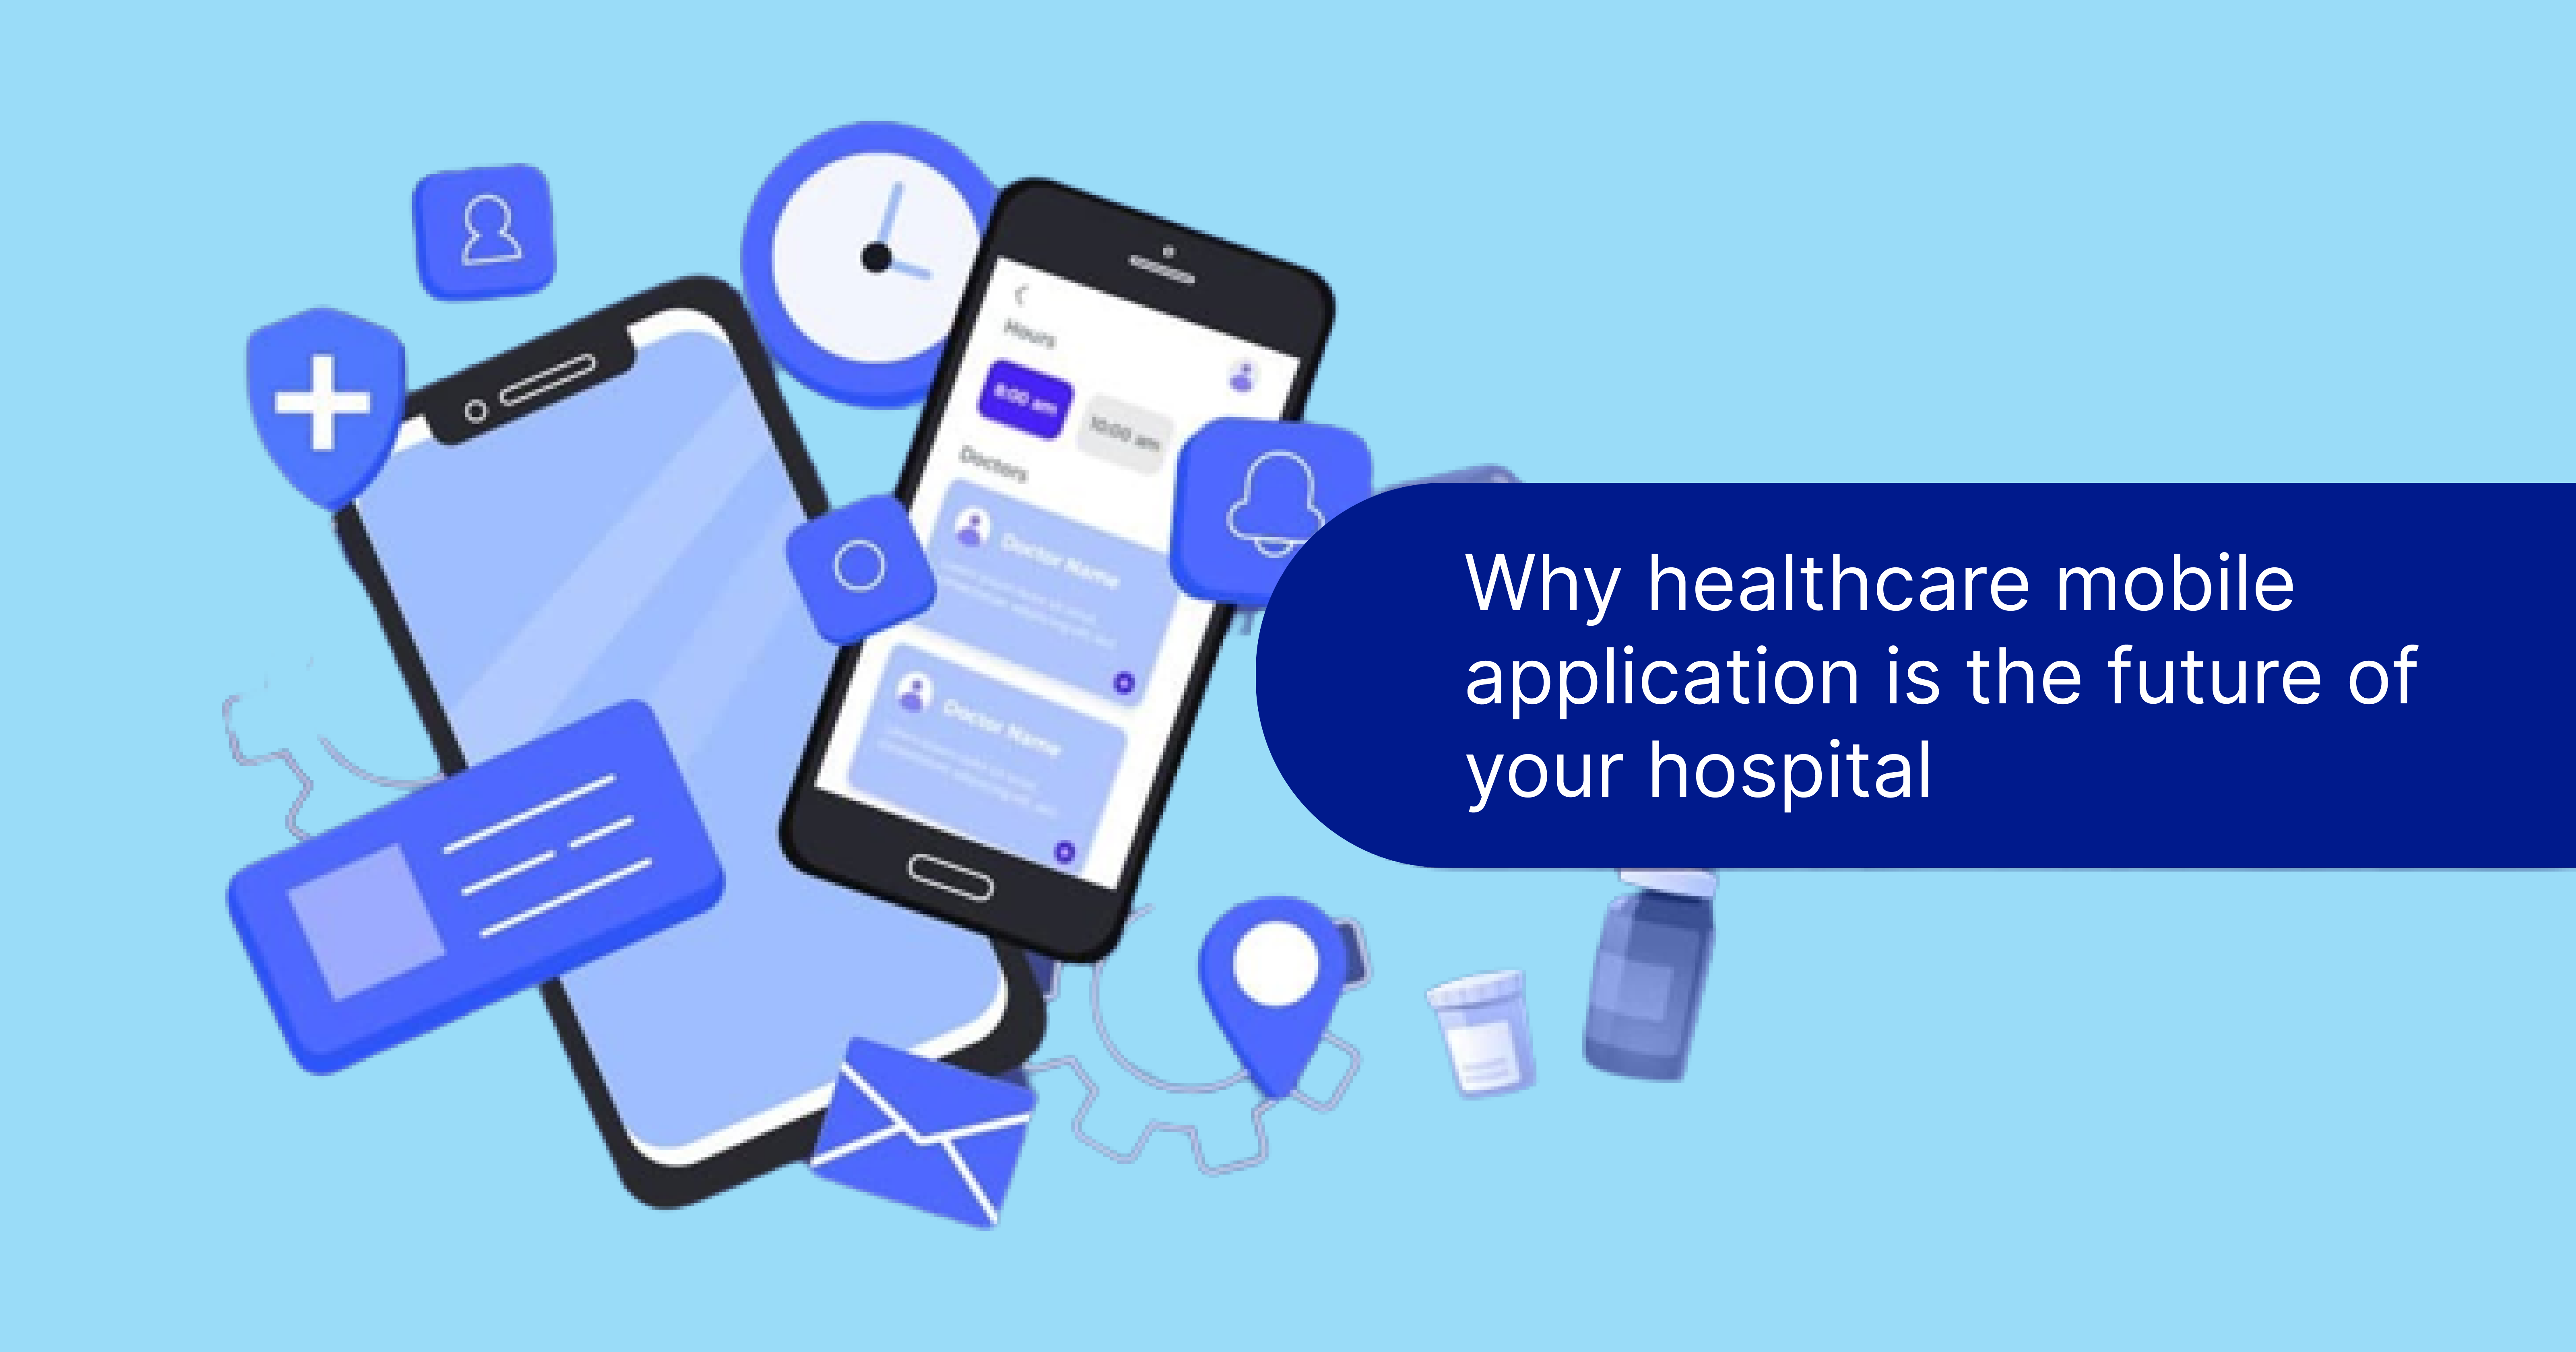 Why healthcare mobile application is the future for your hospital